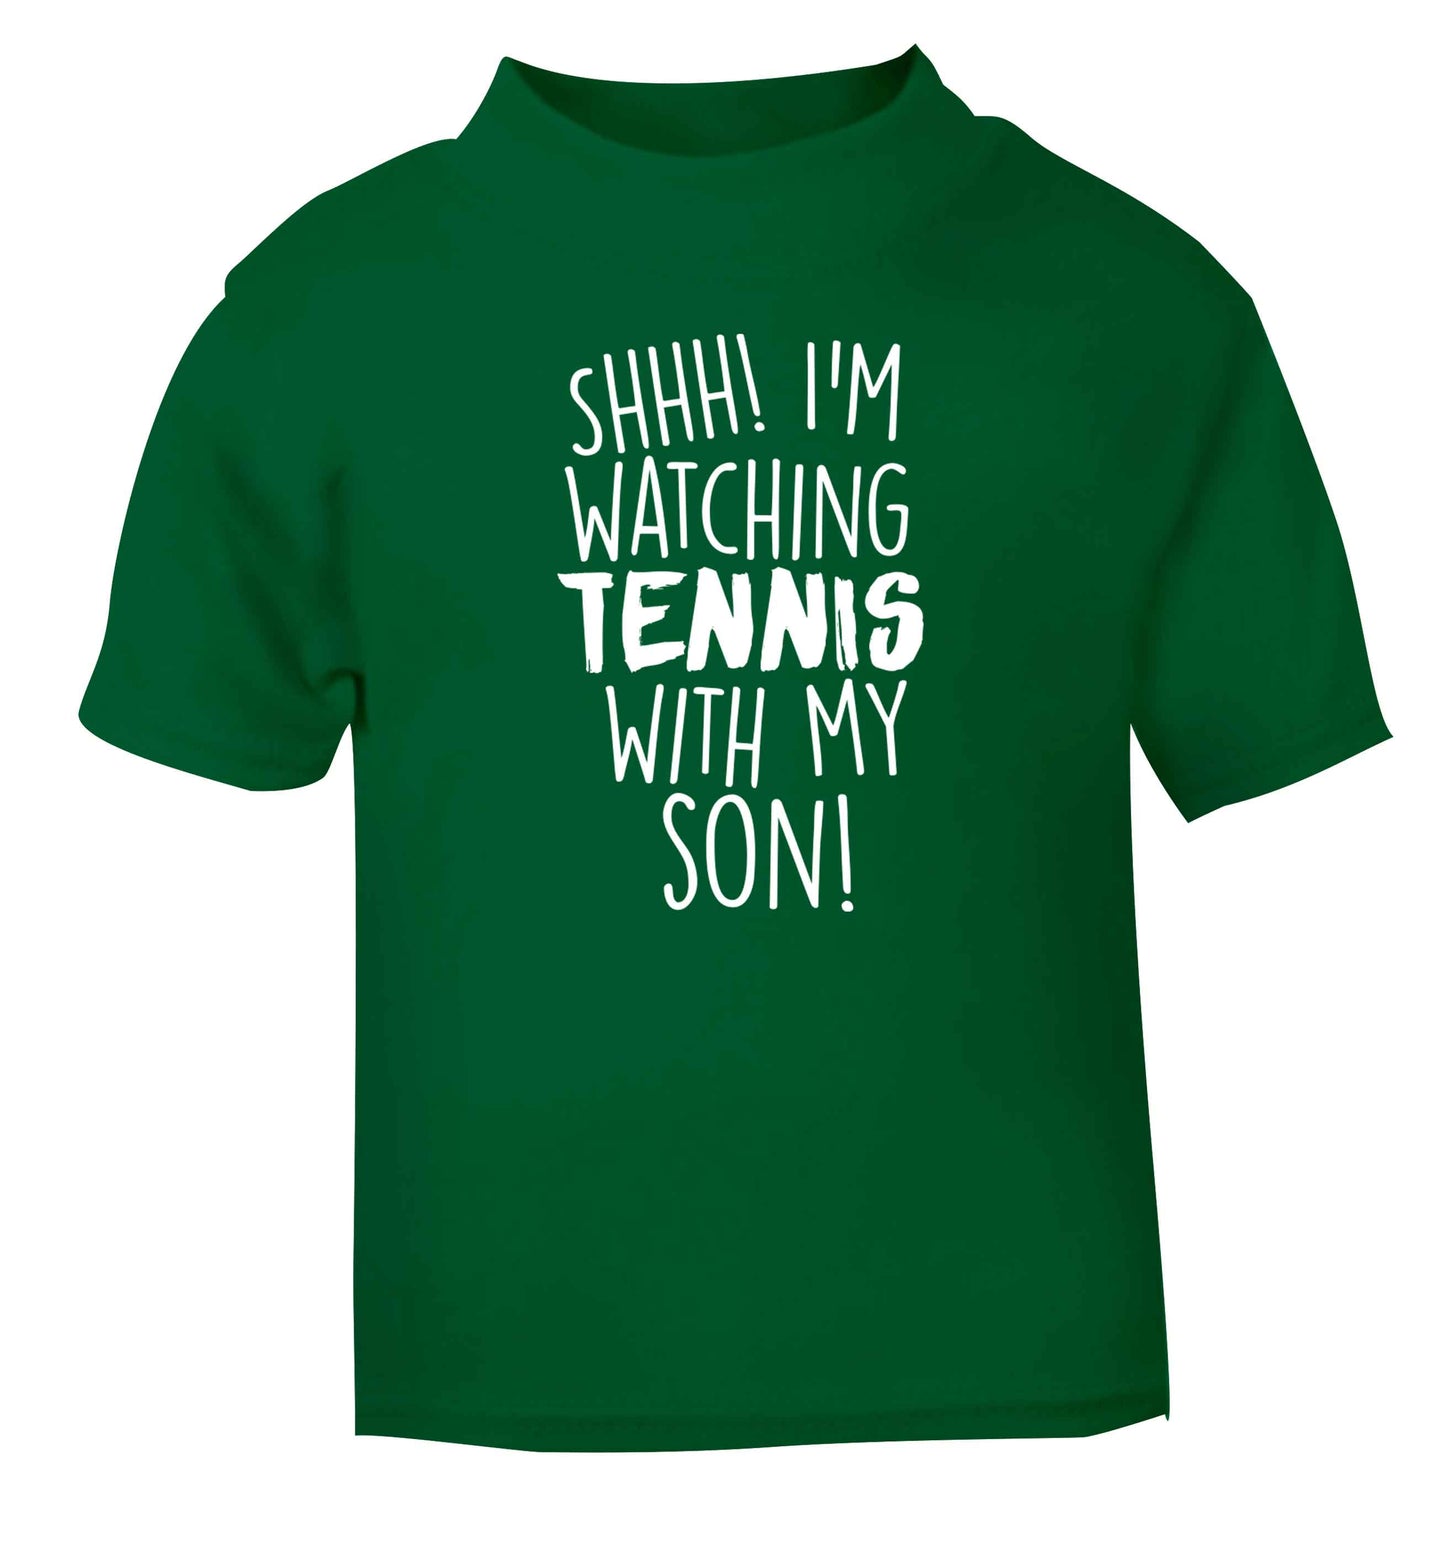 Shh! I'm watching tennis with my son! green Baby Toddler Tshirt 2 Years